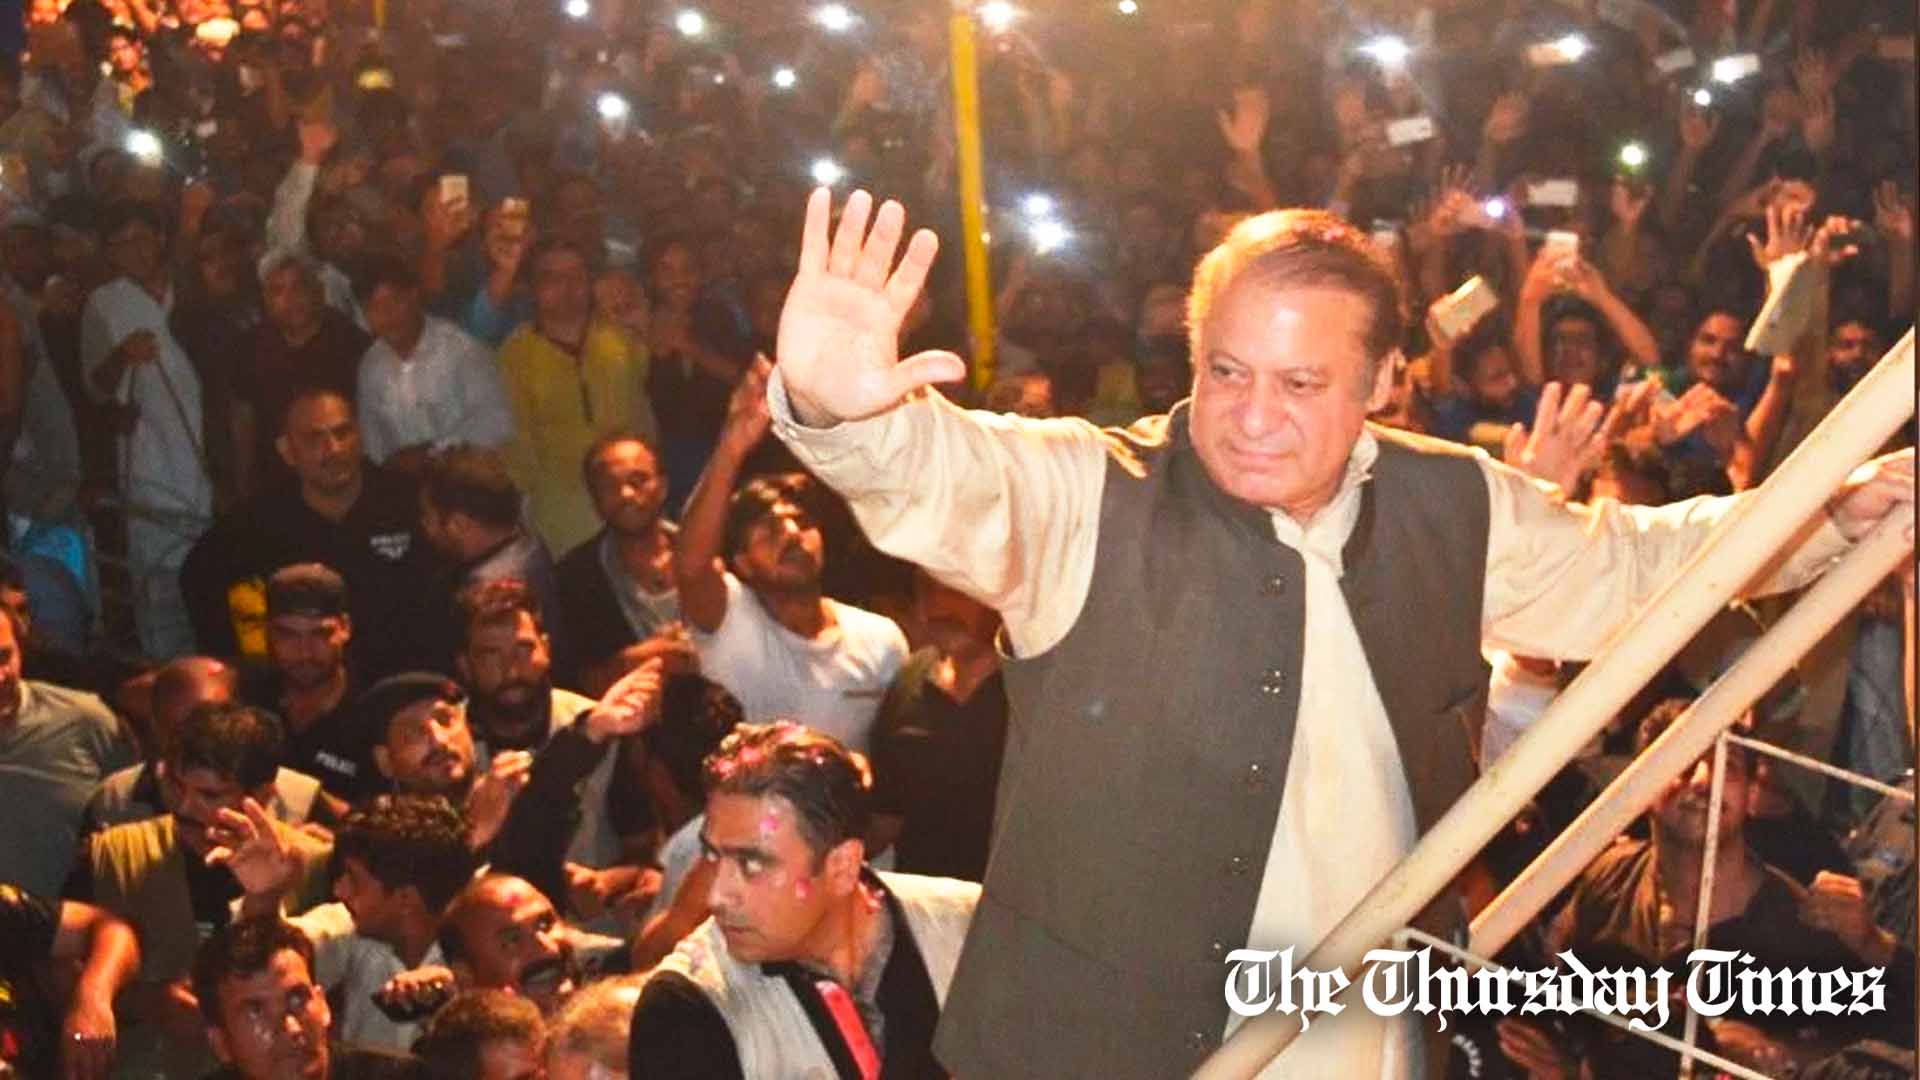 A file photo is shown of former prime minister Nawaz Sharif in 2013. — FILE/THE THURSDAY TIMES